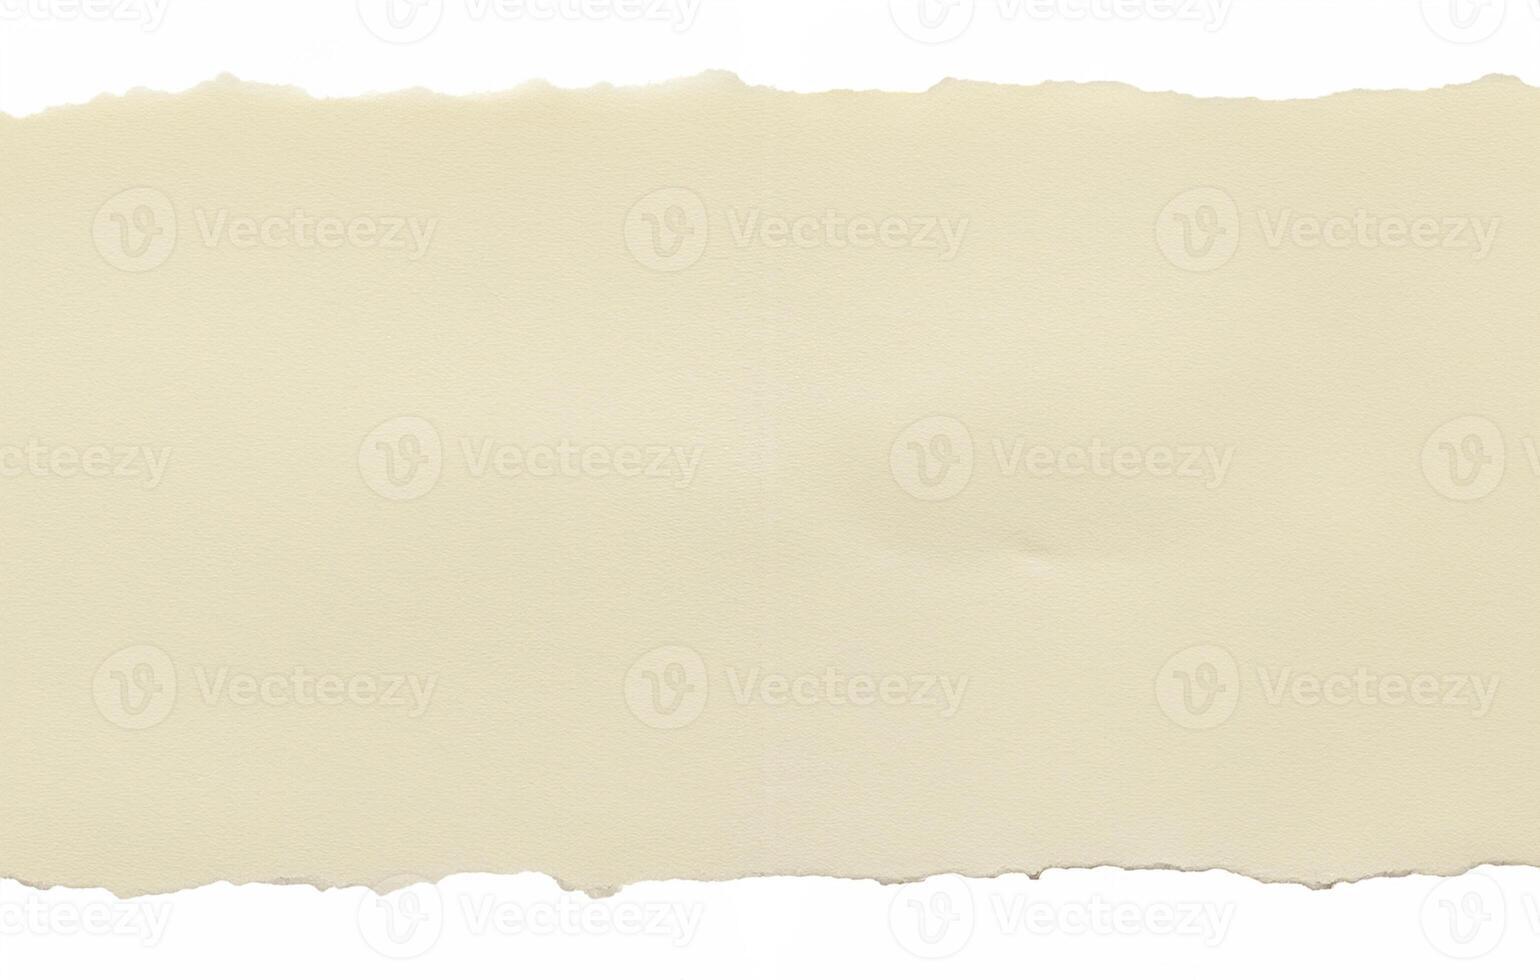 Blank brown torn note paper isolated on white background photo